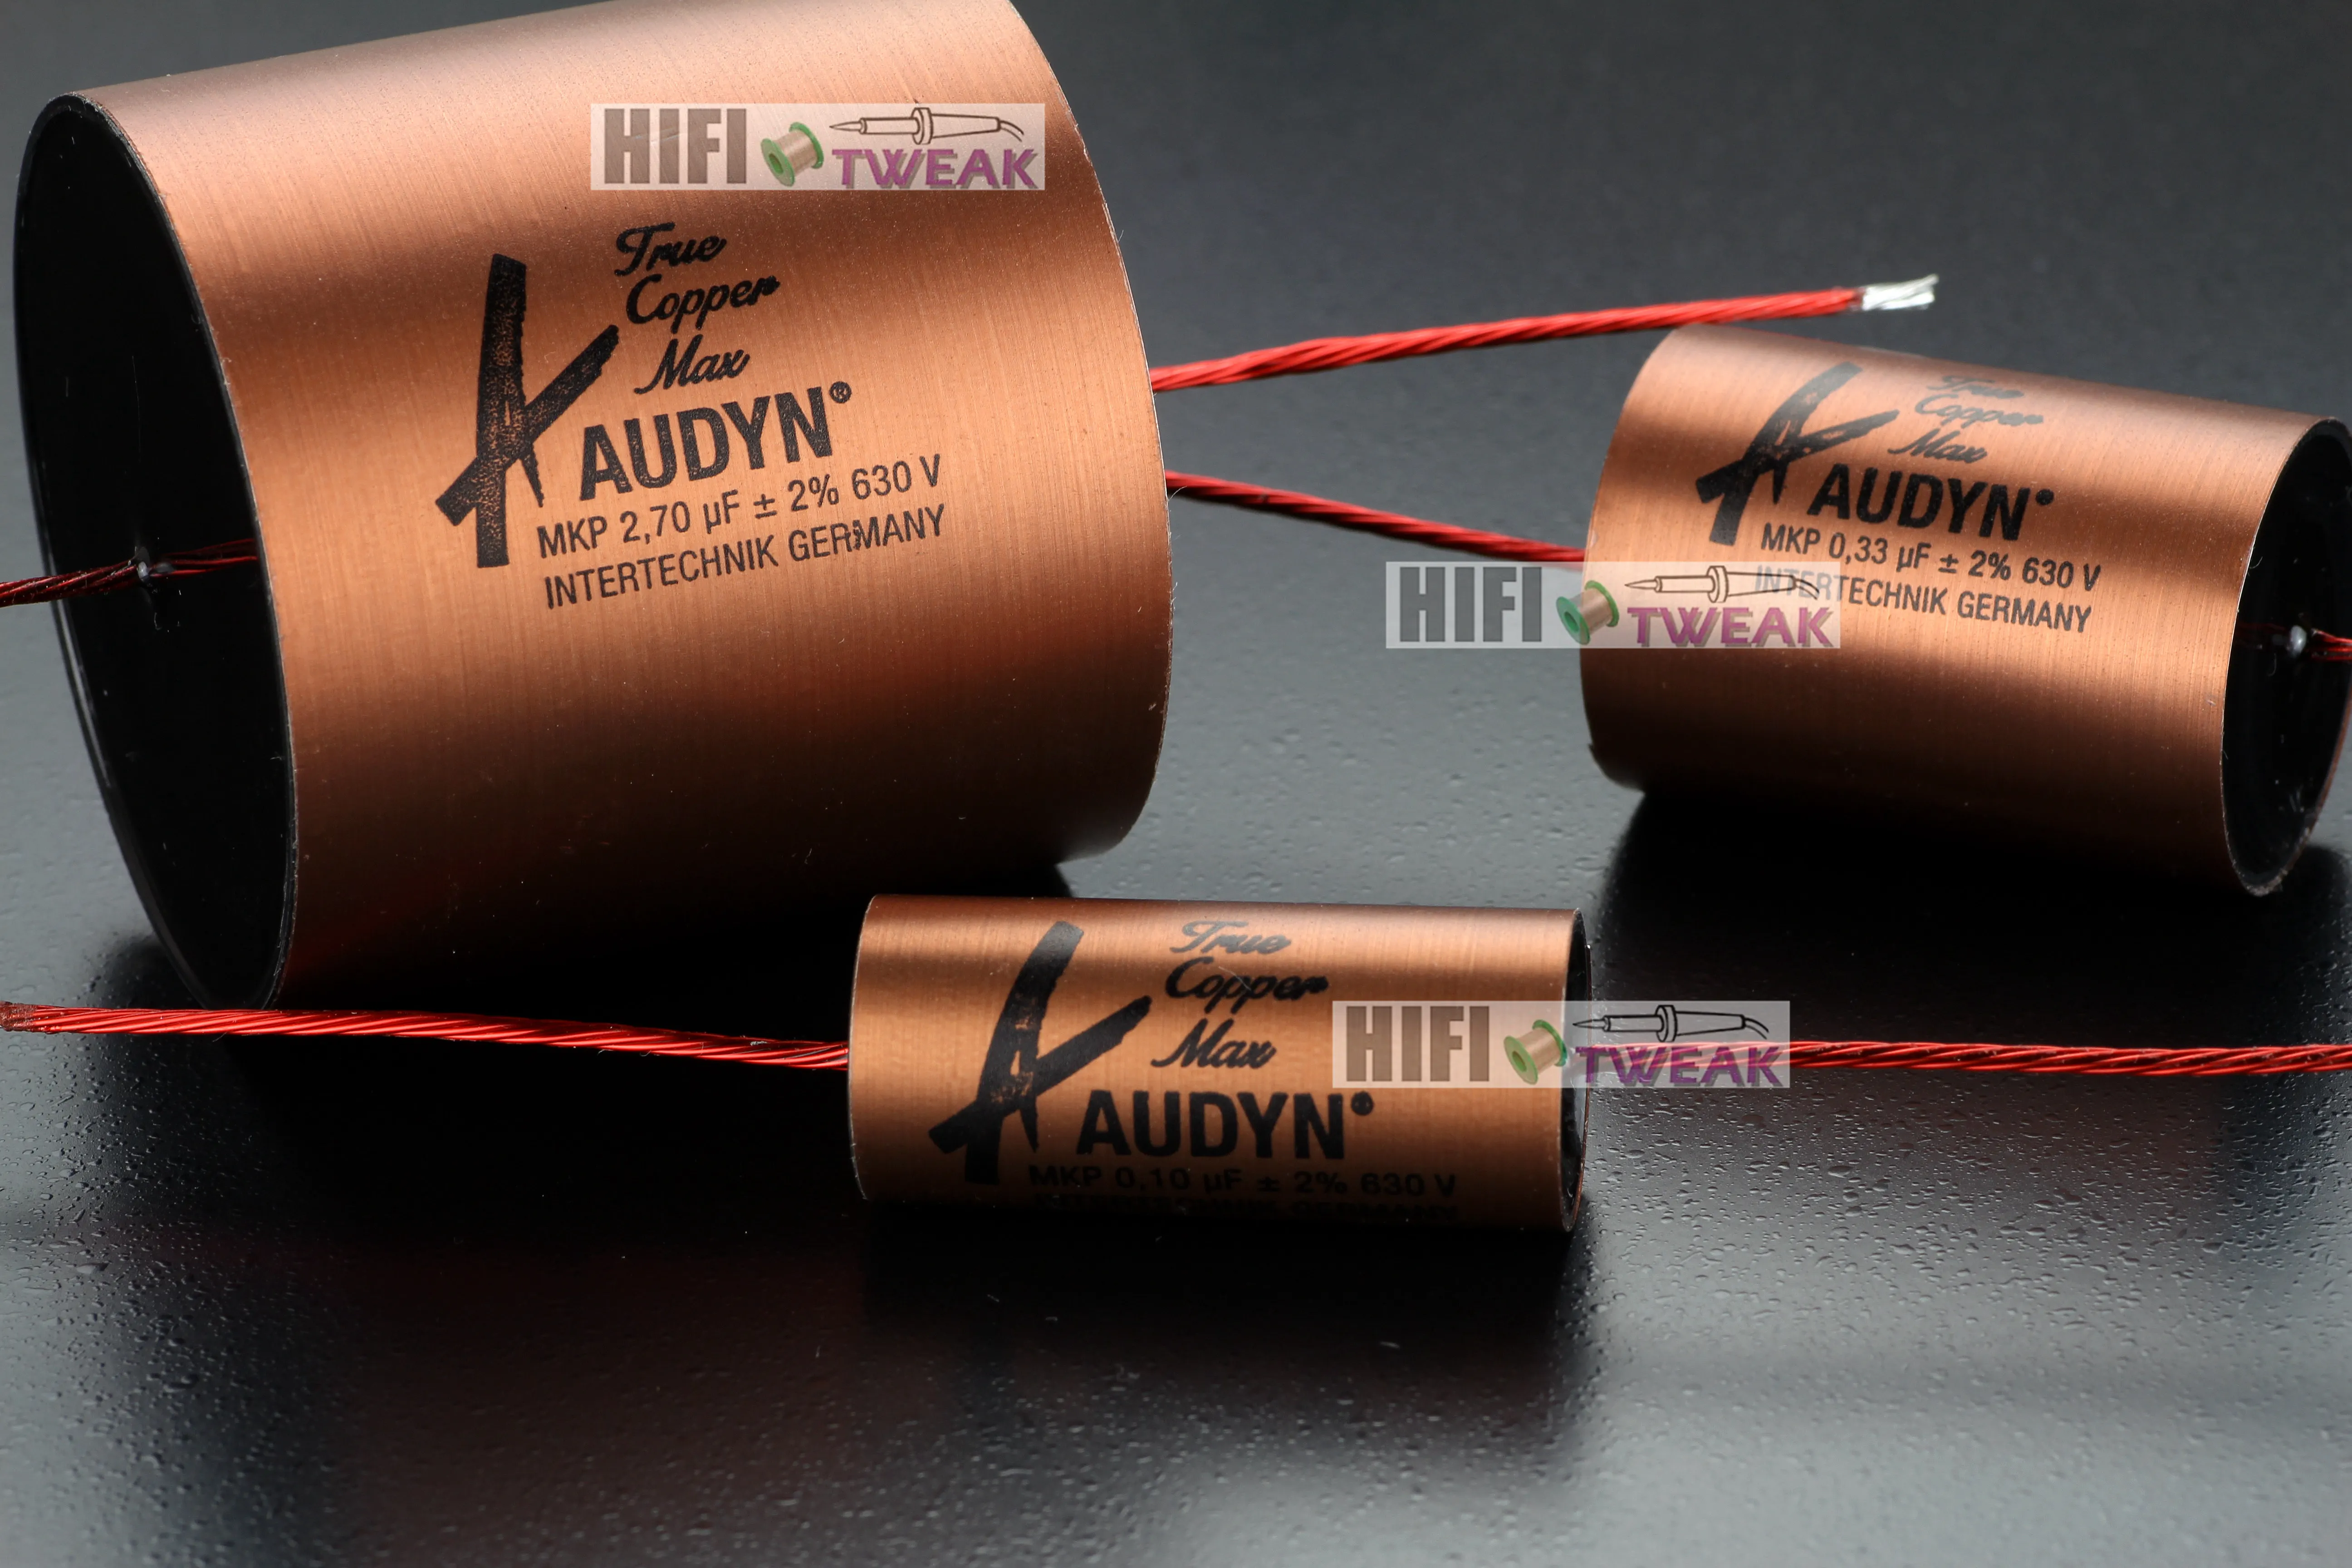 2pcs/lot Germany Audyn True Copper Max series copper foil fever grade audio frequency division coupling capacitor free shipping